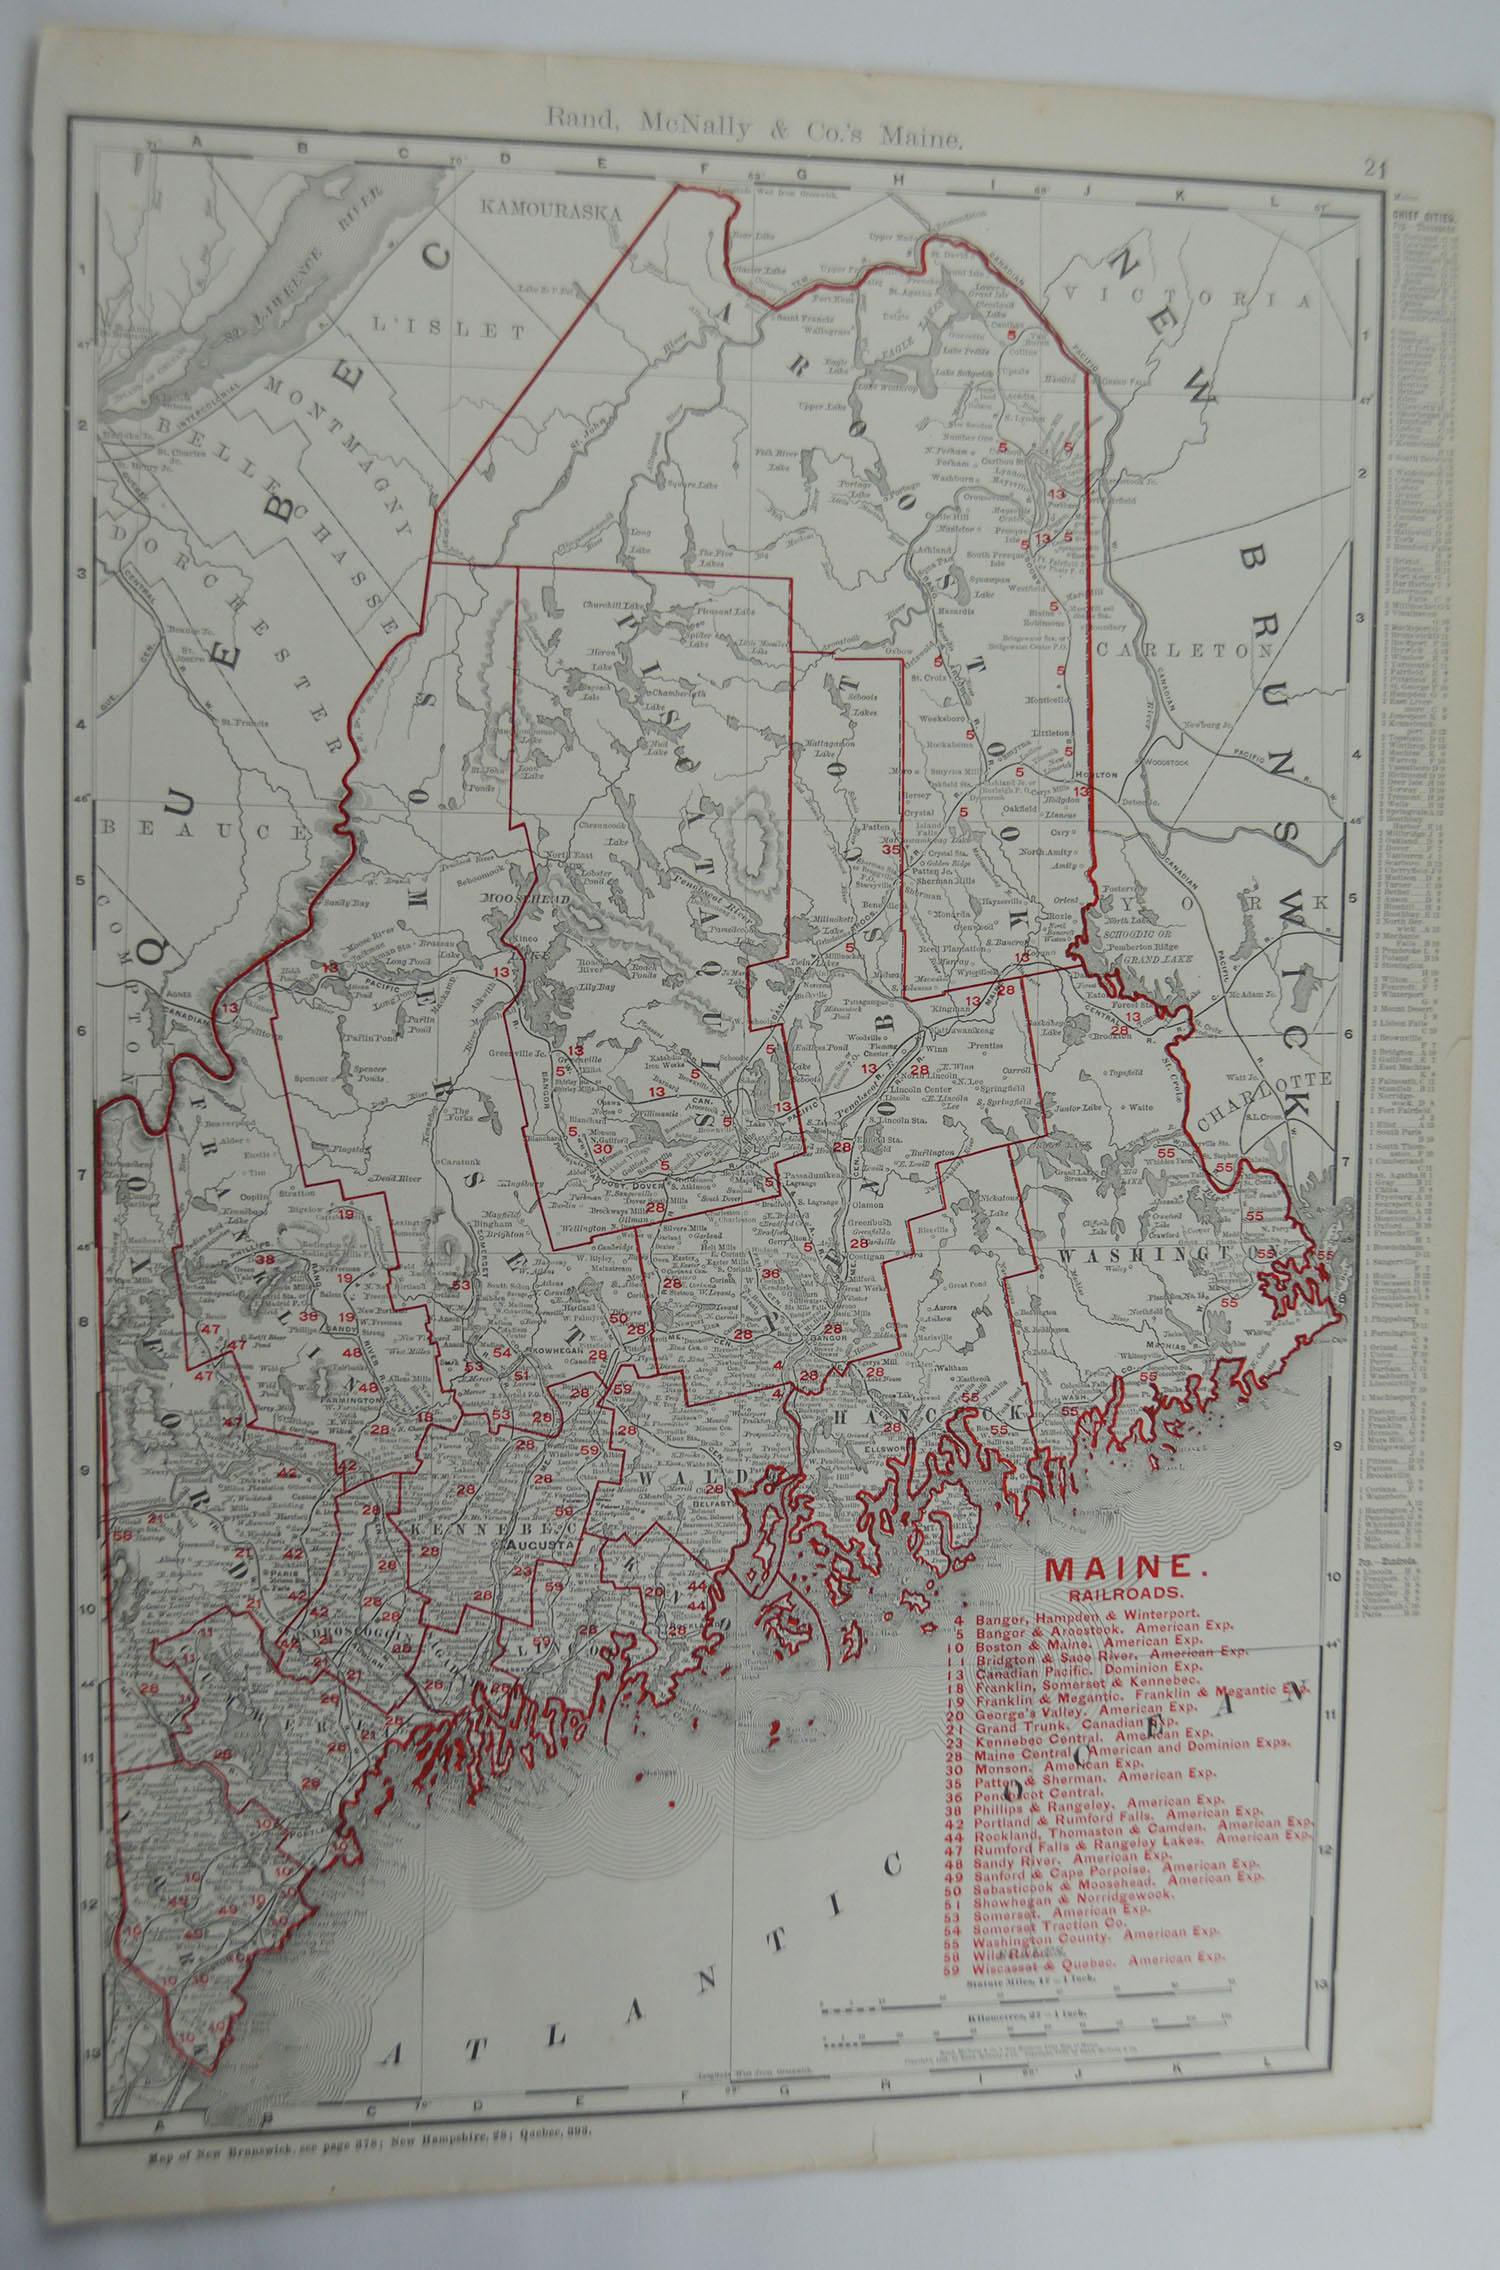 Fabulous monochrome maps with red outline color 

States available are Maine, Connecticut, New Mexico, Vermont, Maryland,
South Dakota, Nevada, Utah, Montana and New Hampshire.

Original color

By Rand, McNally & Co.

Published circa